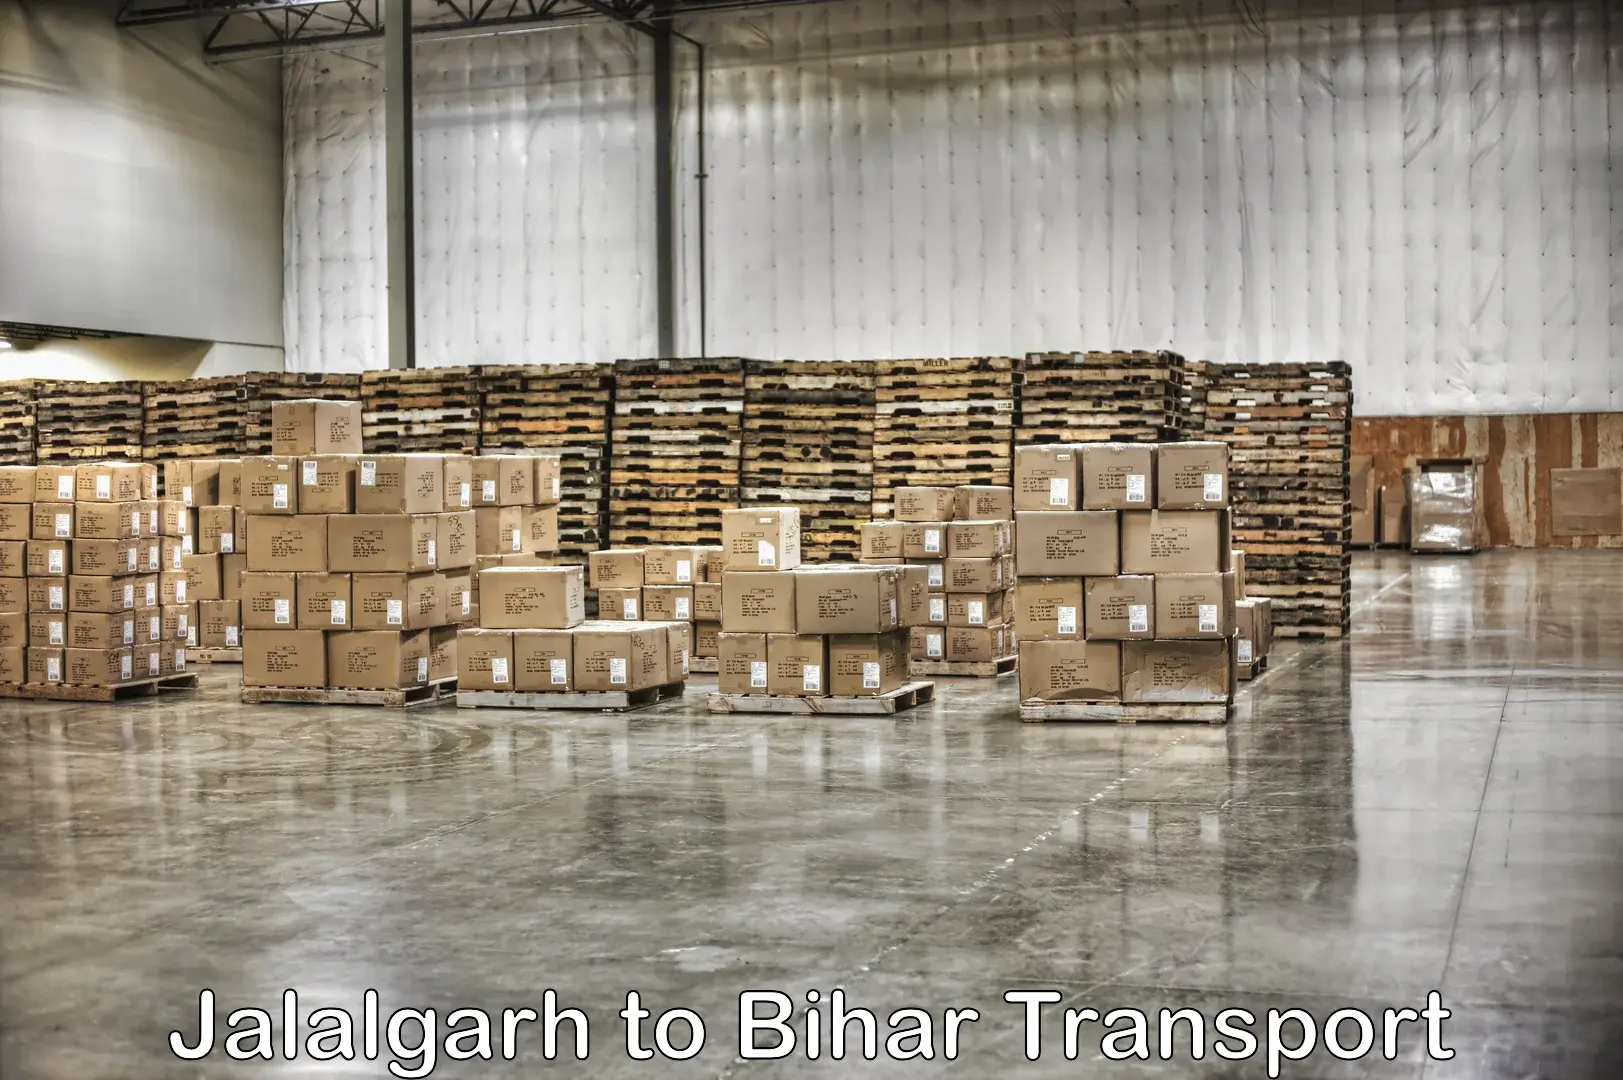 Express transport services in Jalalgarh to Bhojpur